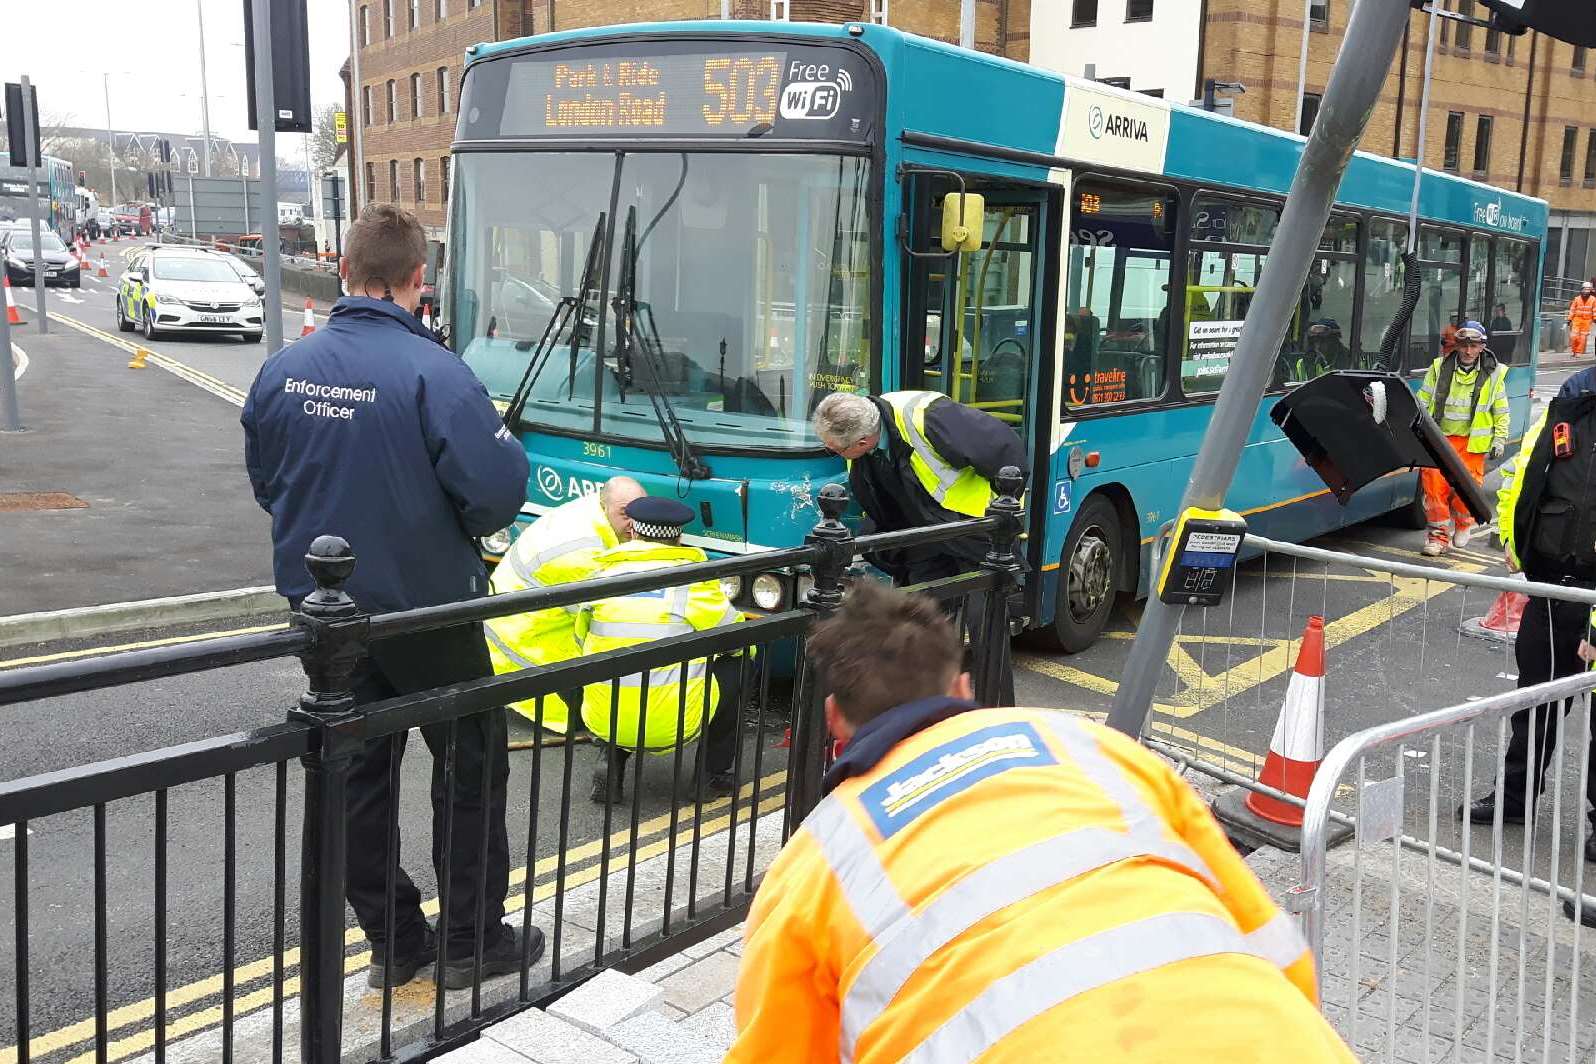 The bus crashed into a traffic light